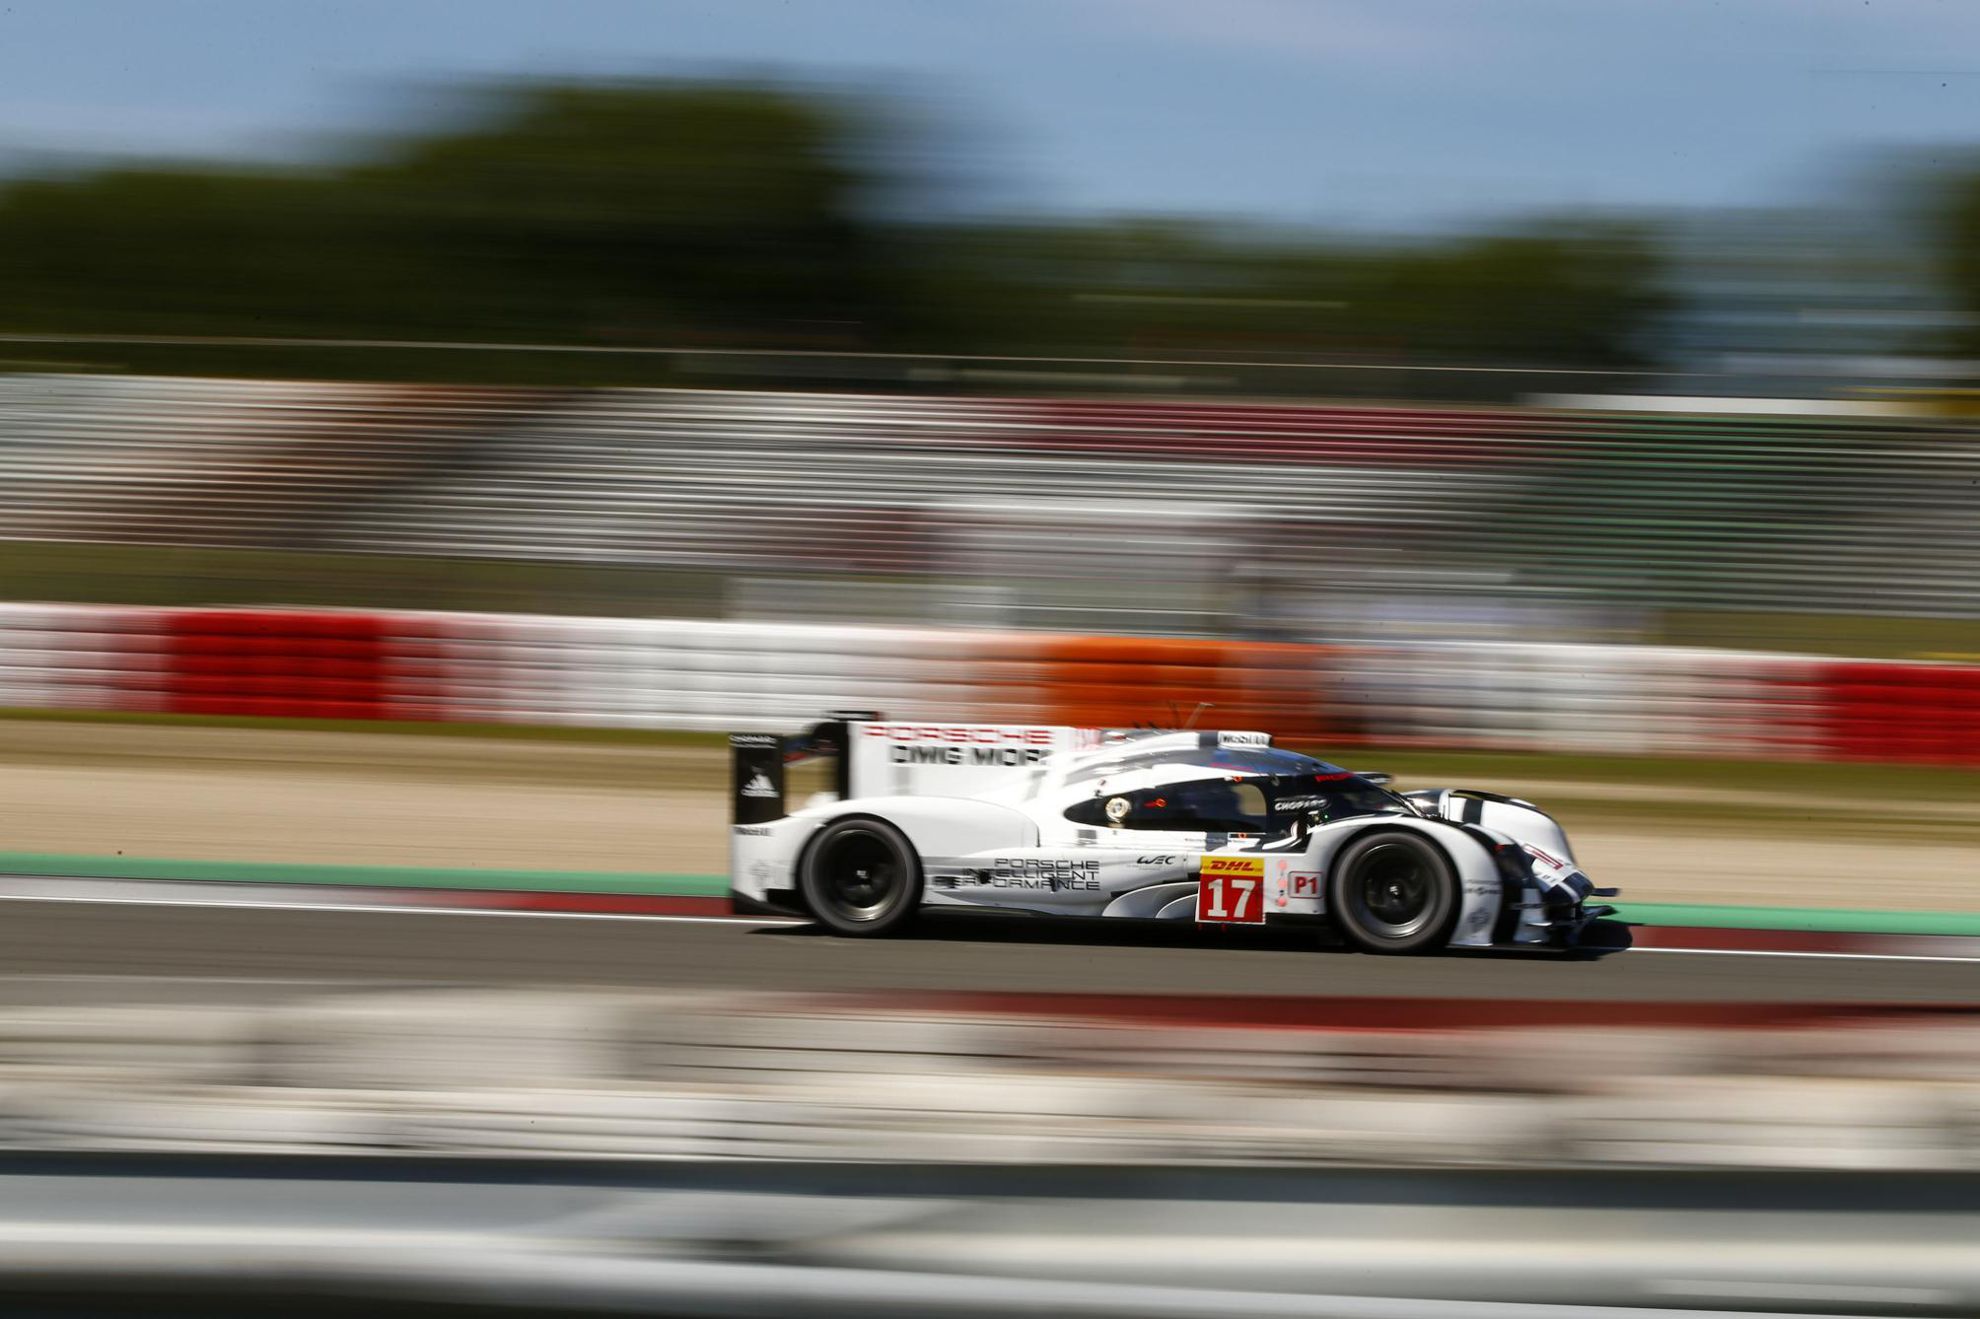 PORSCHE 919 HYBRIDS – LEAD EXTENDED IN WEC